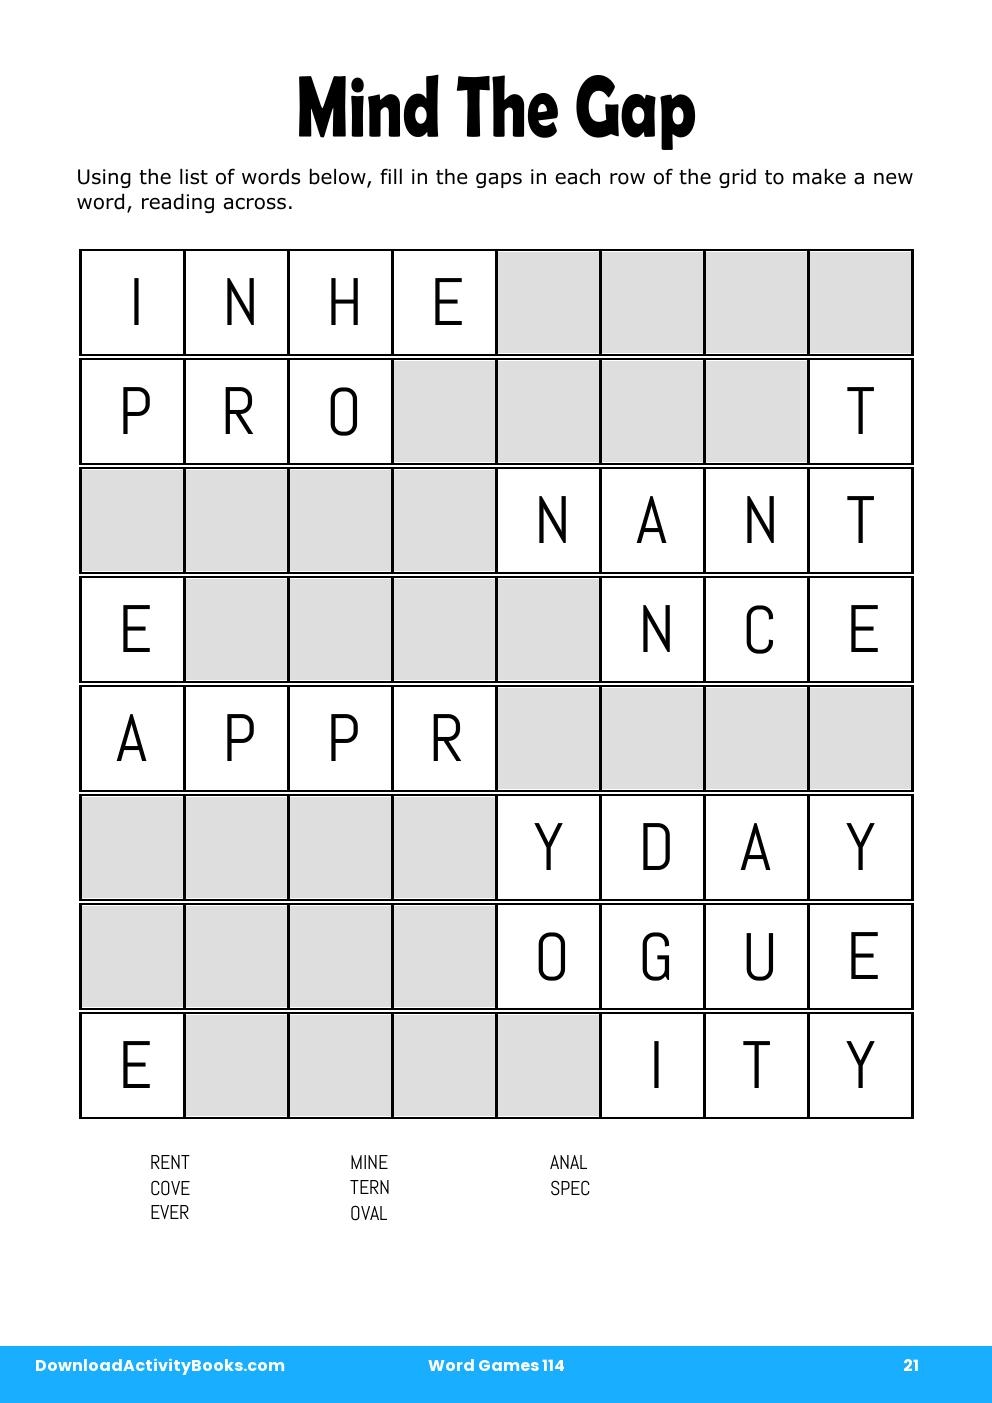 Mind The Gap in Word Games 114